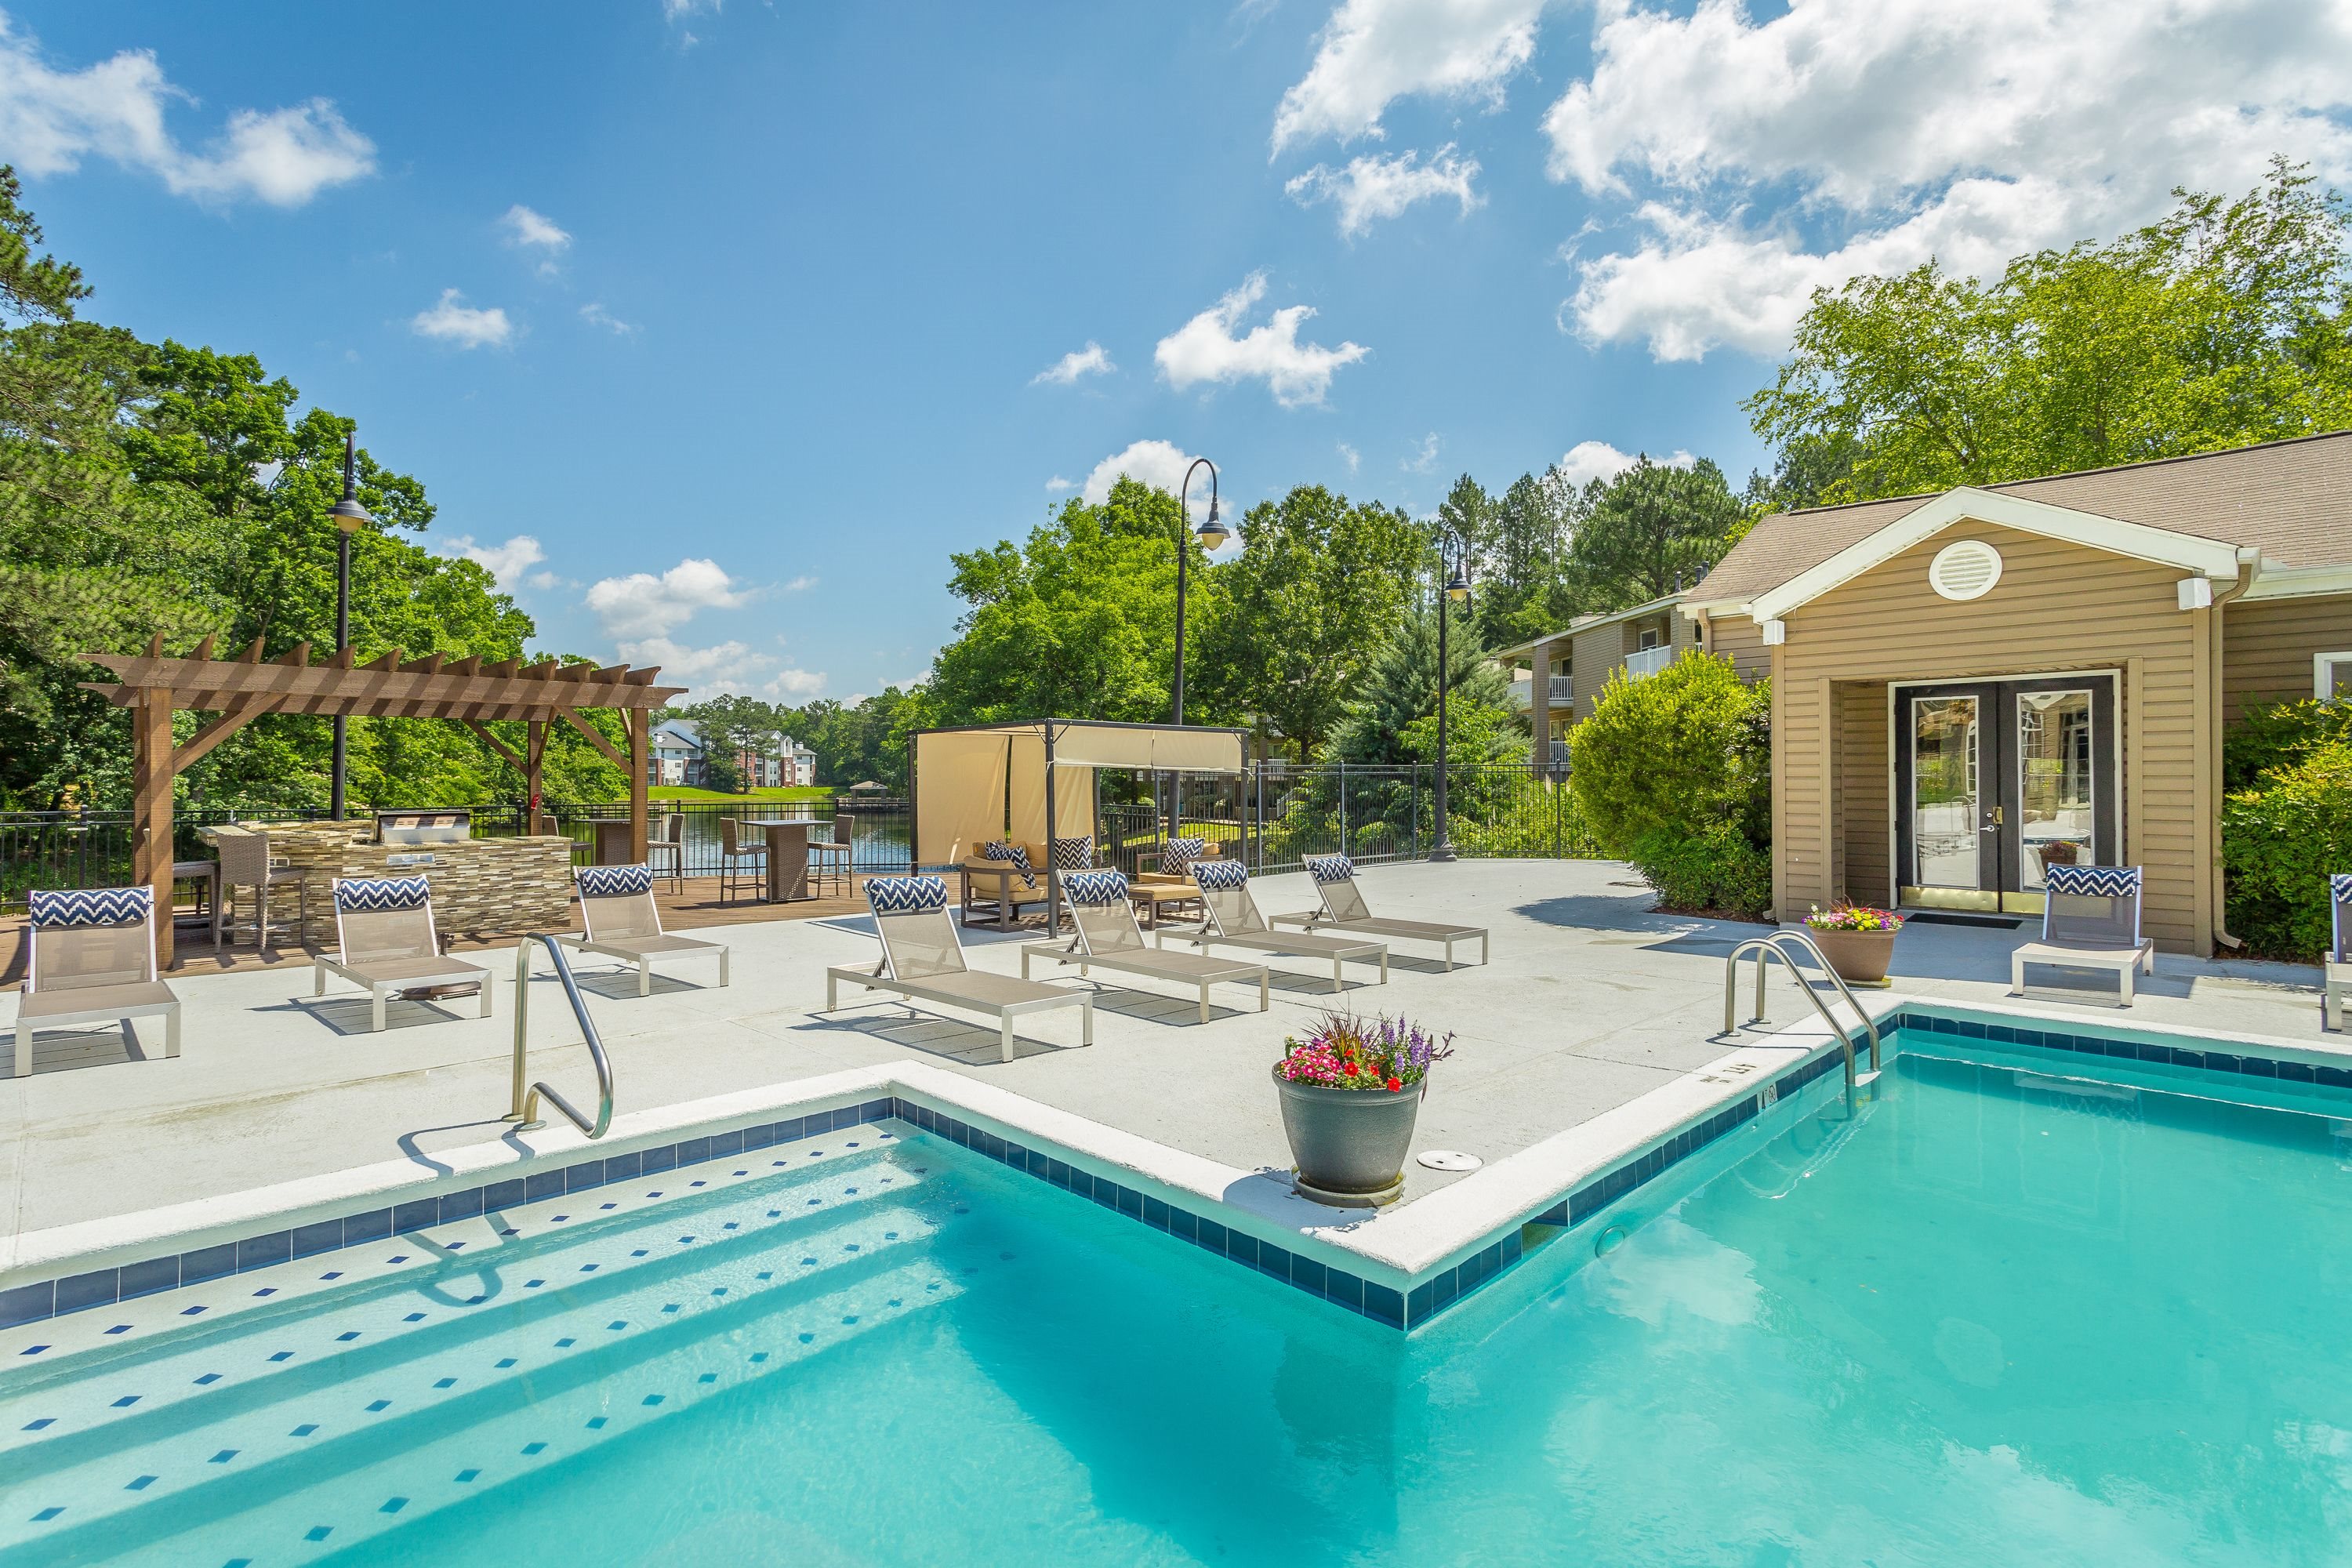 Sparkling swimming pool and spacious sundeck at The Avenues of Inverness  in Birmingham, AL